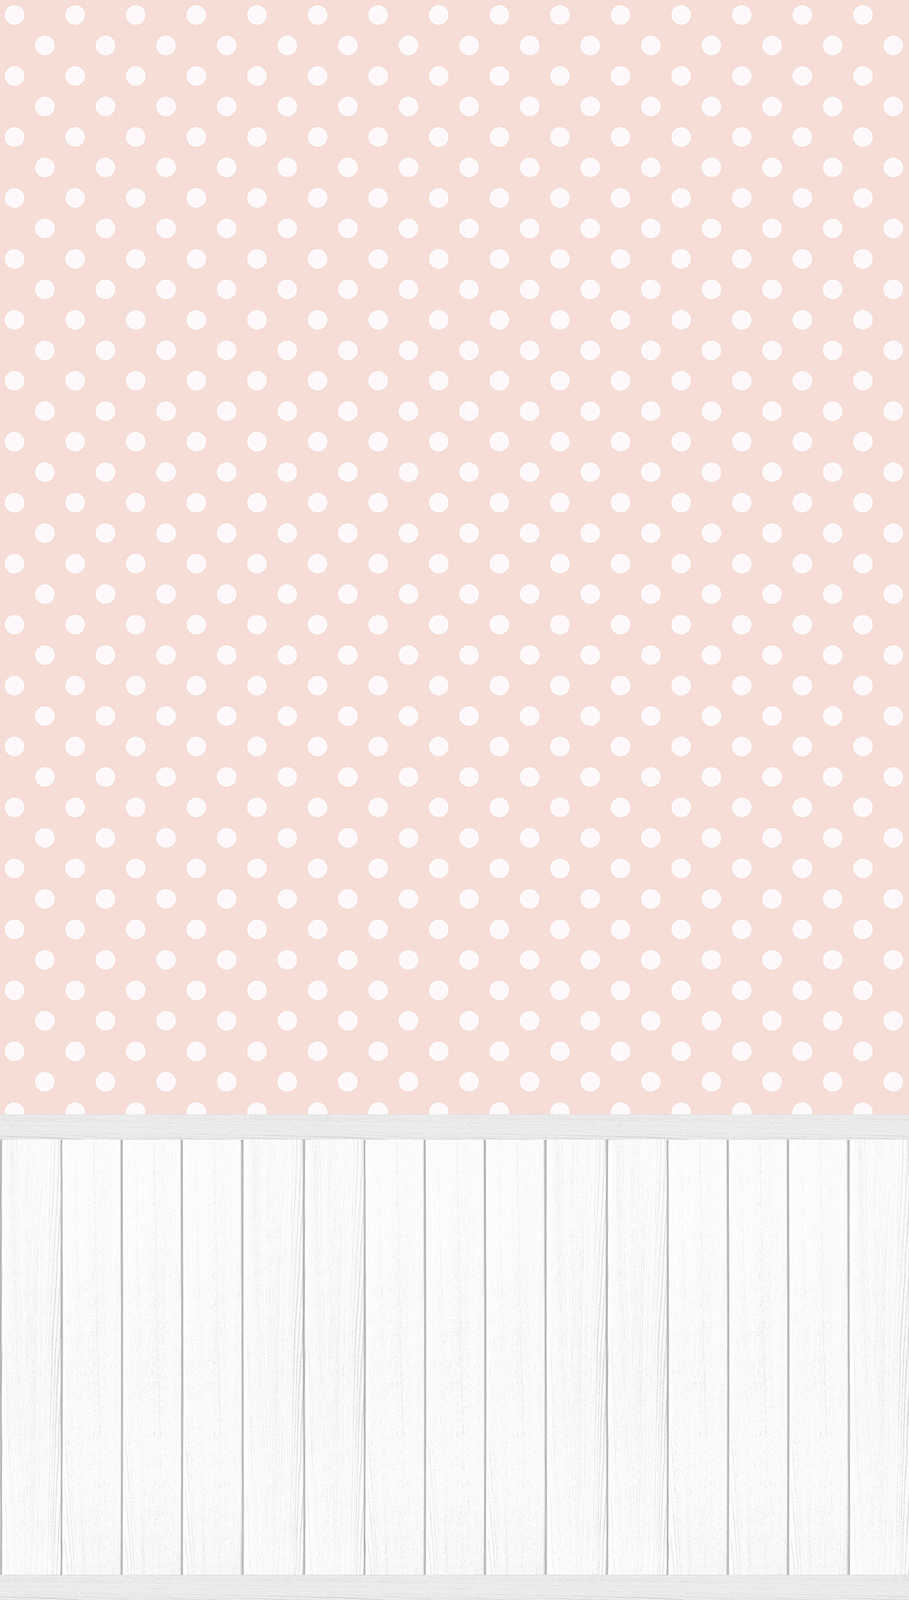             Non-woven motif wallpaper with wood-effect plinth border and dot pattern - white, grey, pink
        